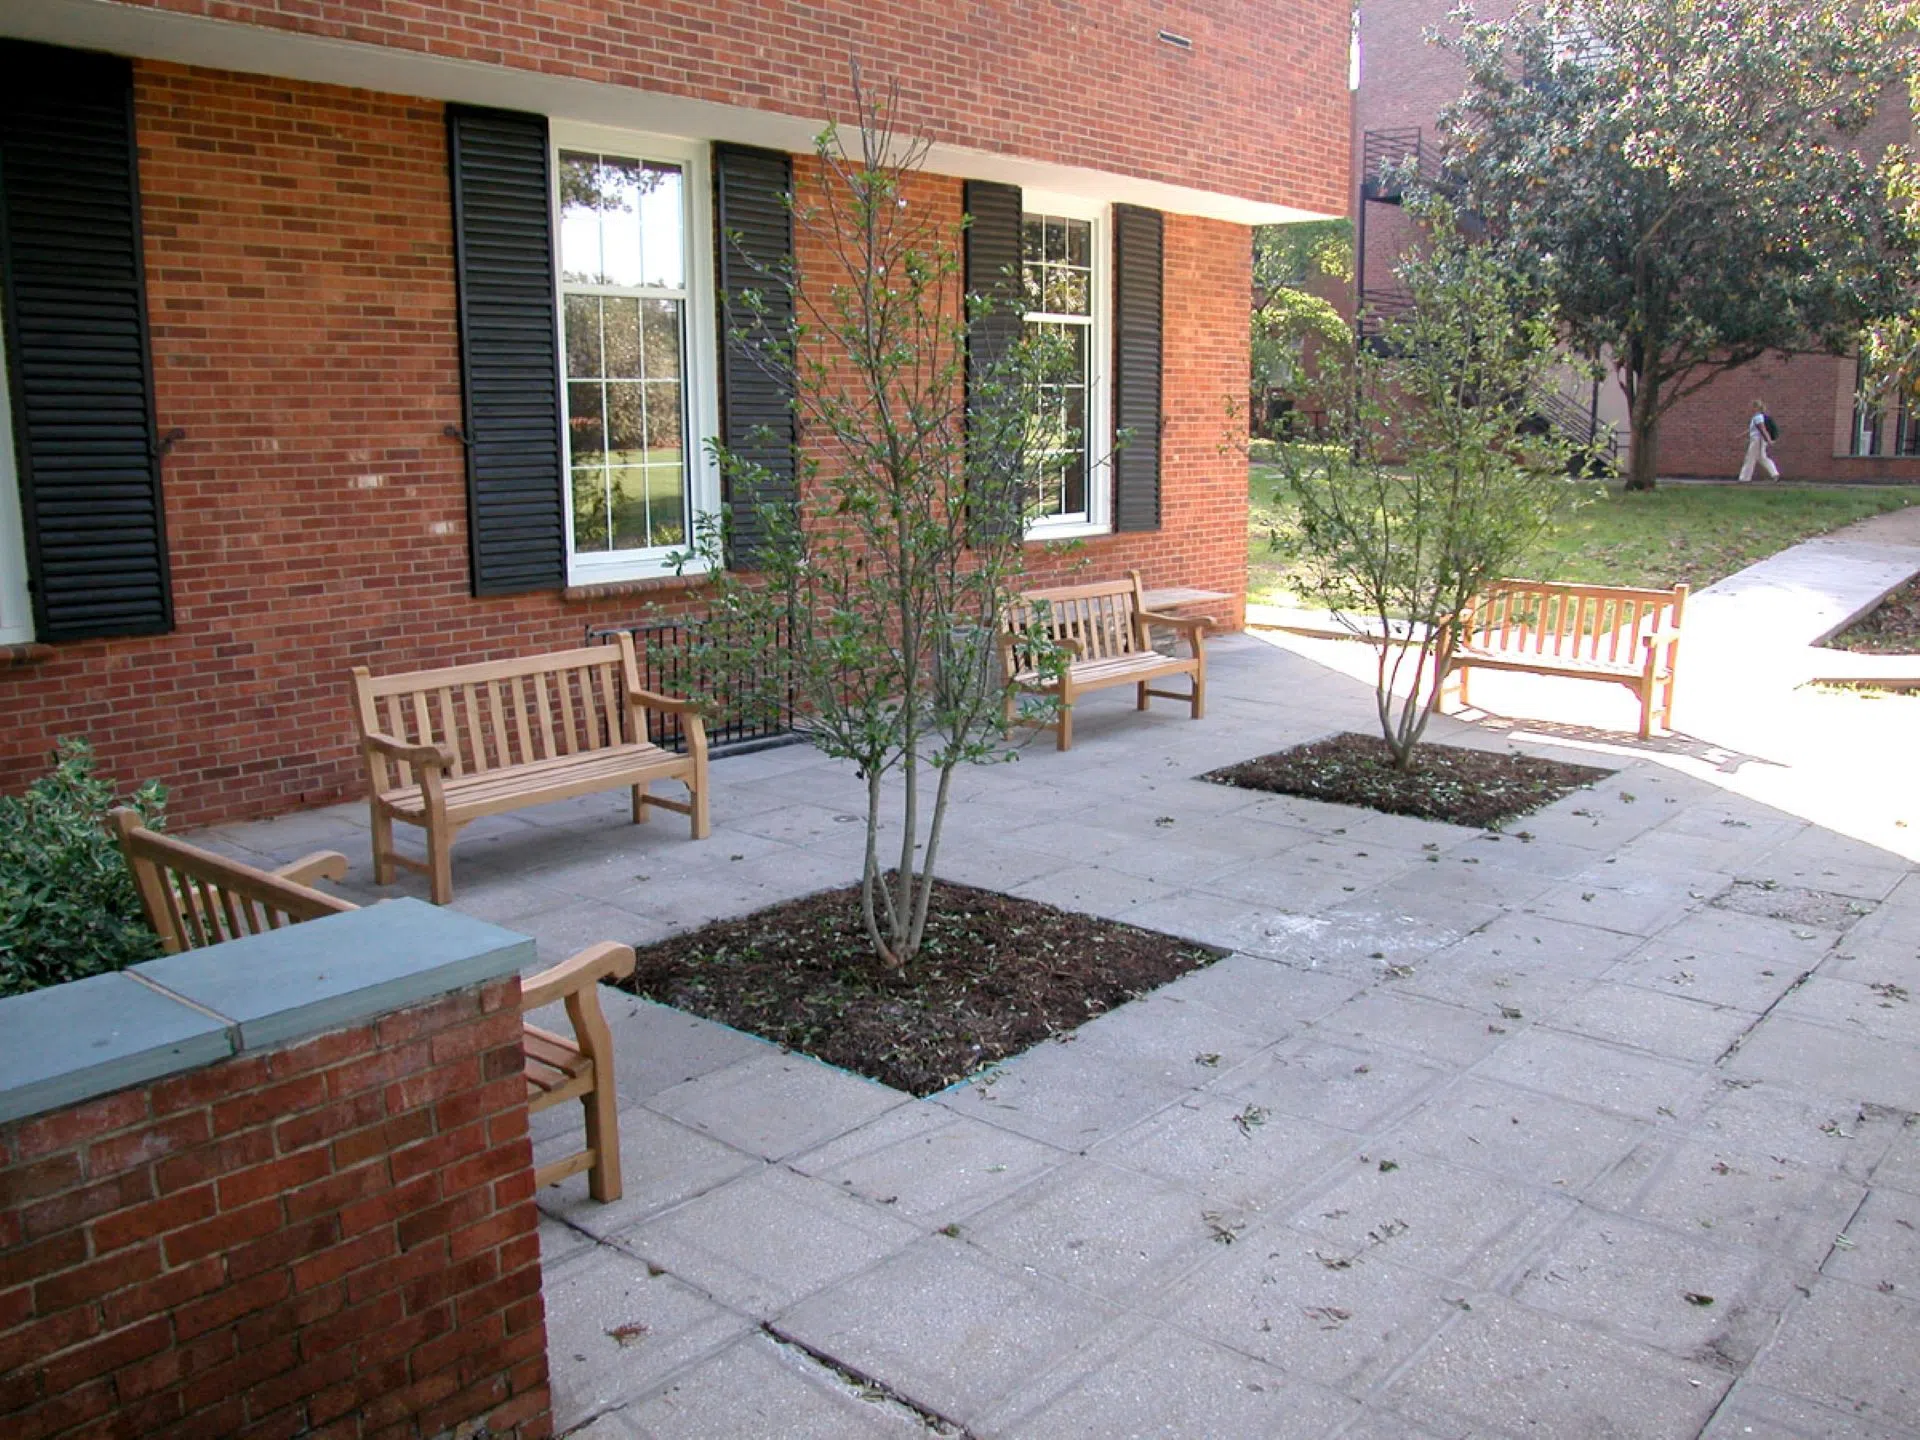 A brick building with black-shuttered windows is the backdrop of a paved courtyard with four wooden bench and two small trees.